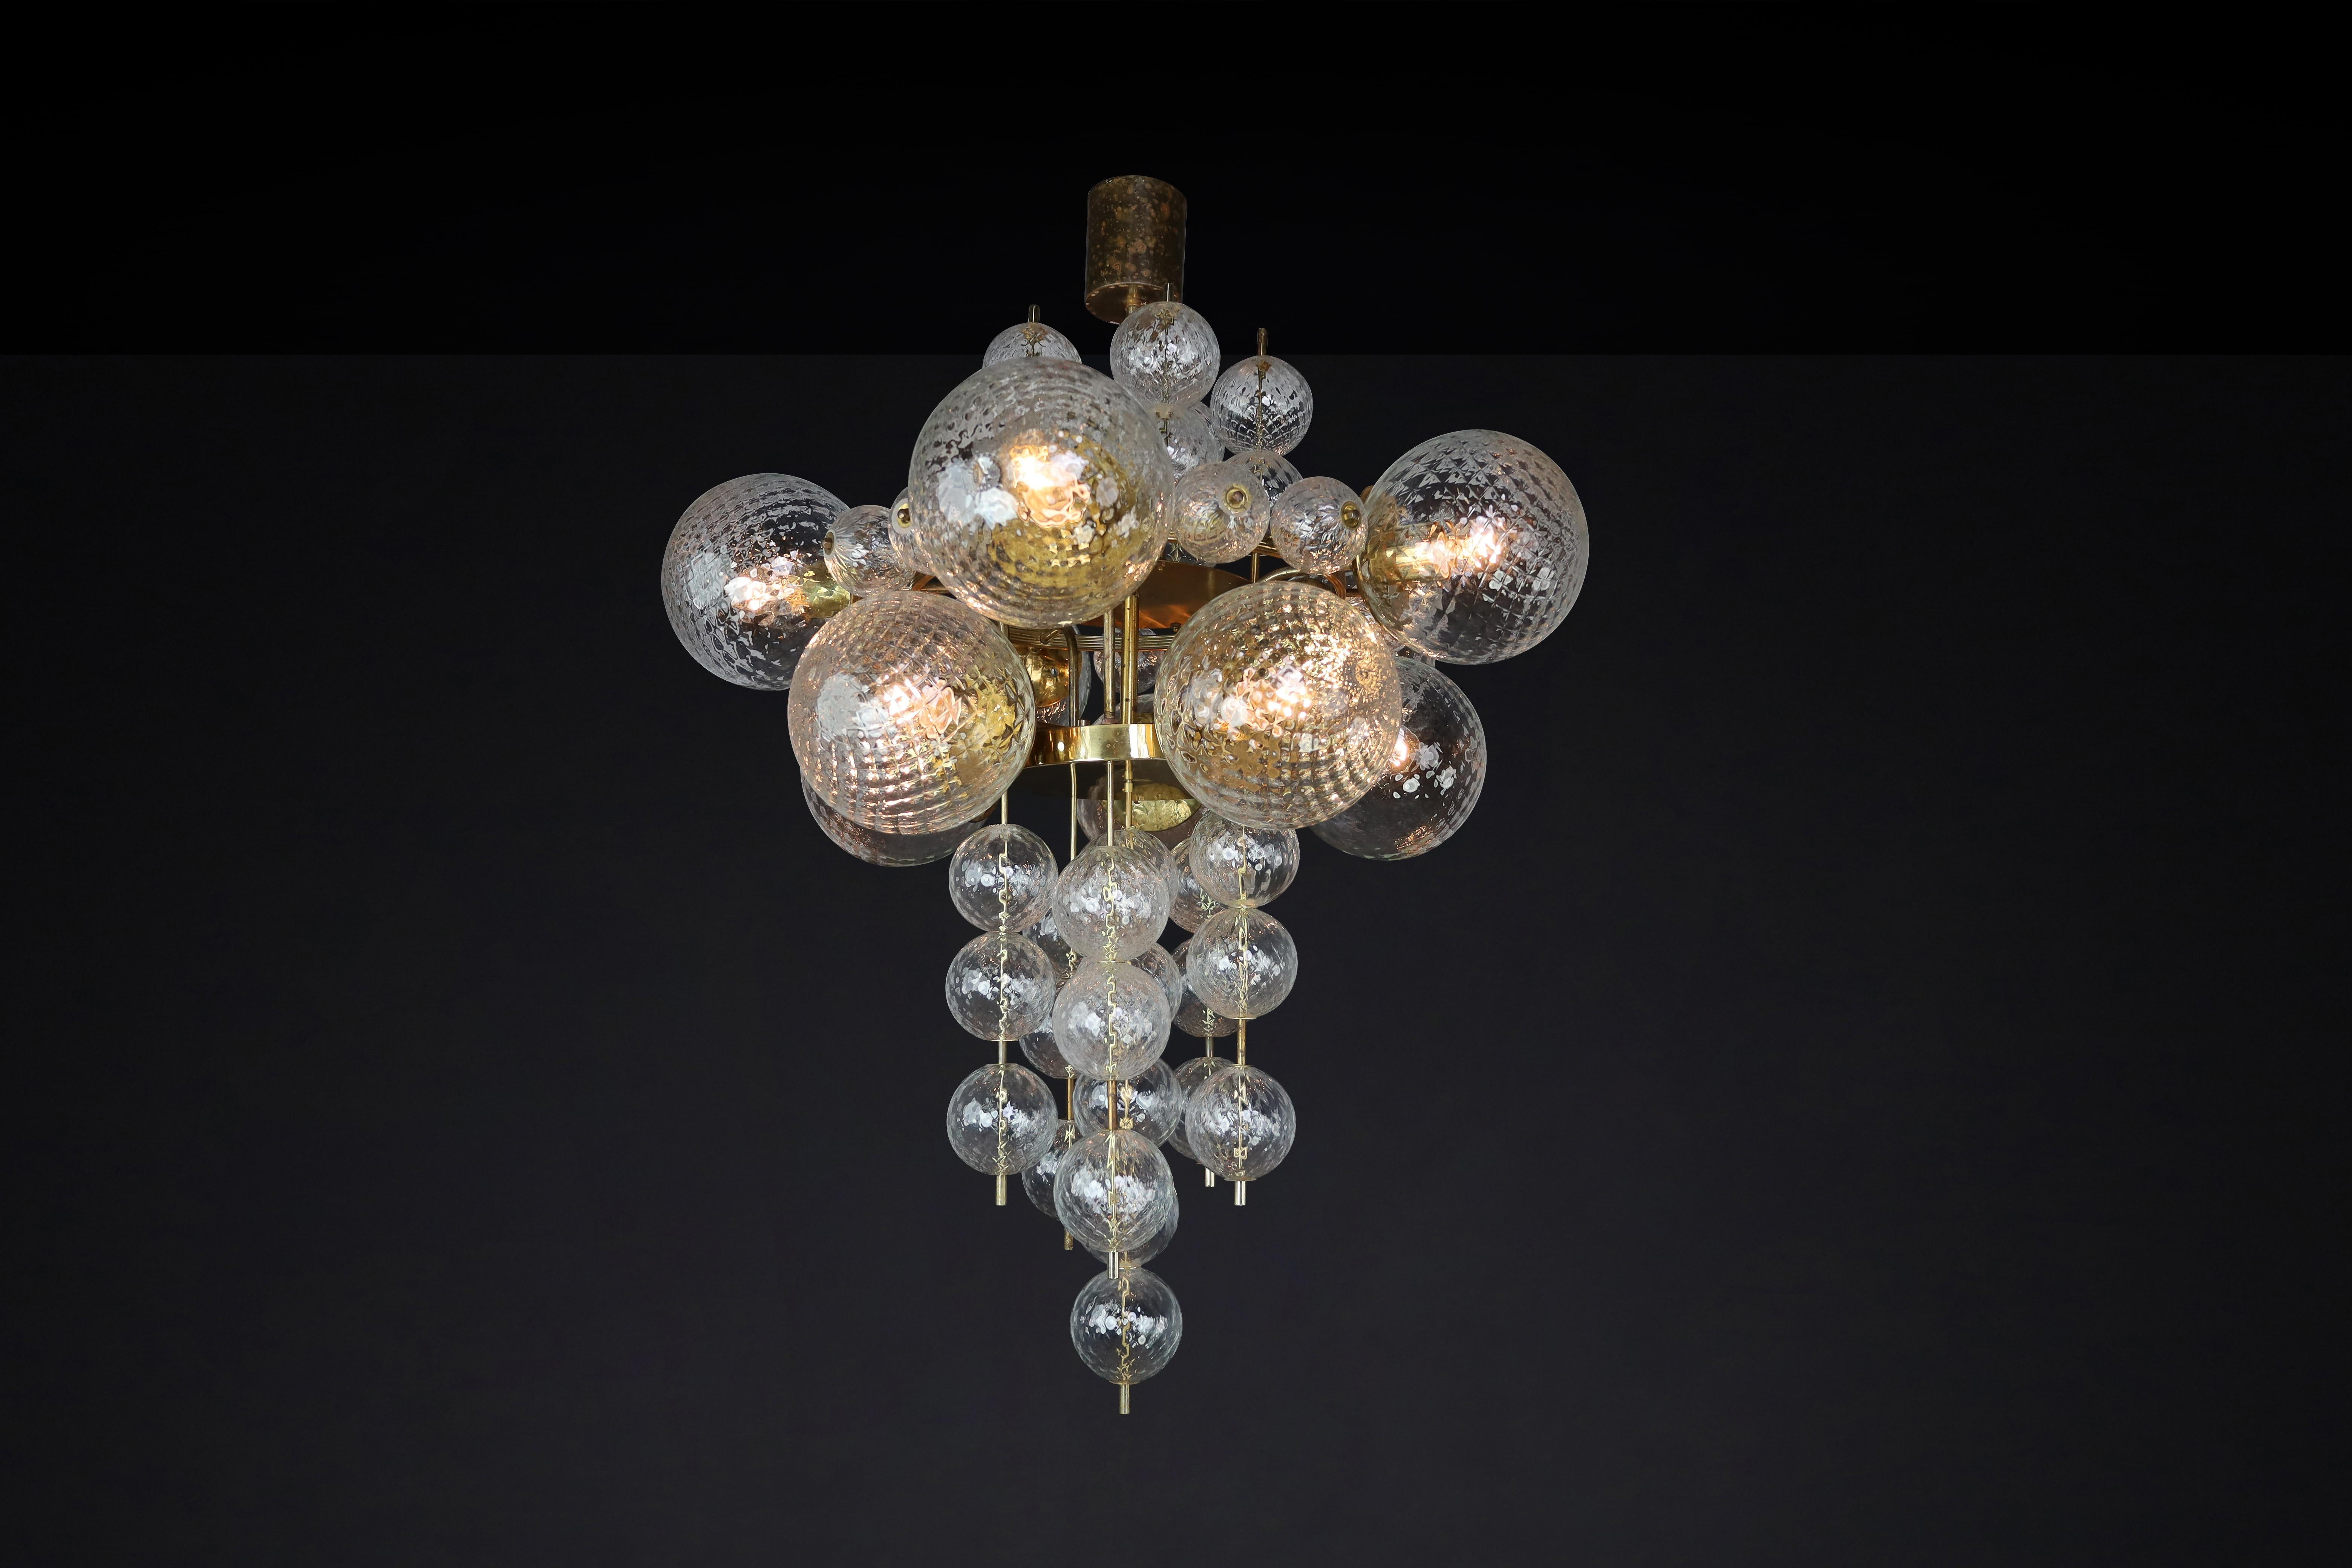 Large Chandelier with Patinated brass fixture and hand-blowed glass globes by Preciosa, Czechia, 1960s

This Chandelier was made in the 1960s and is from a grand hotel in Prague. It features a patinated brass fixture and hand-blown glass globes